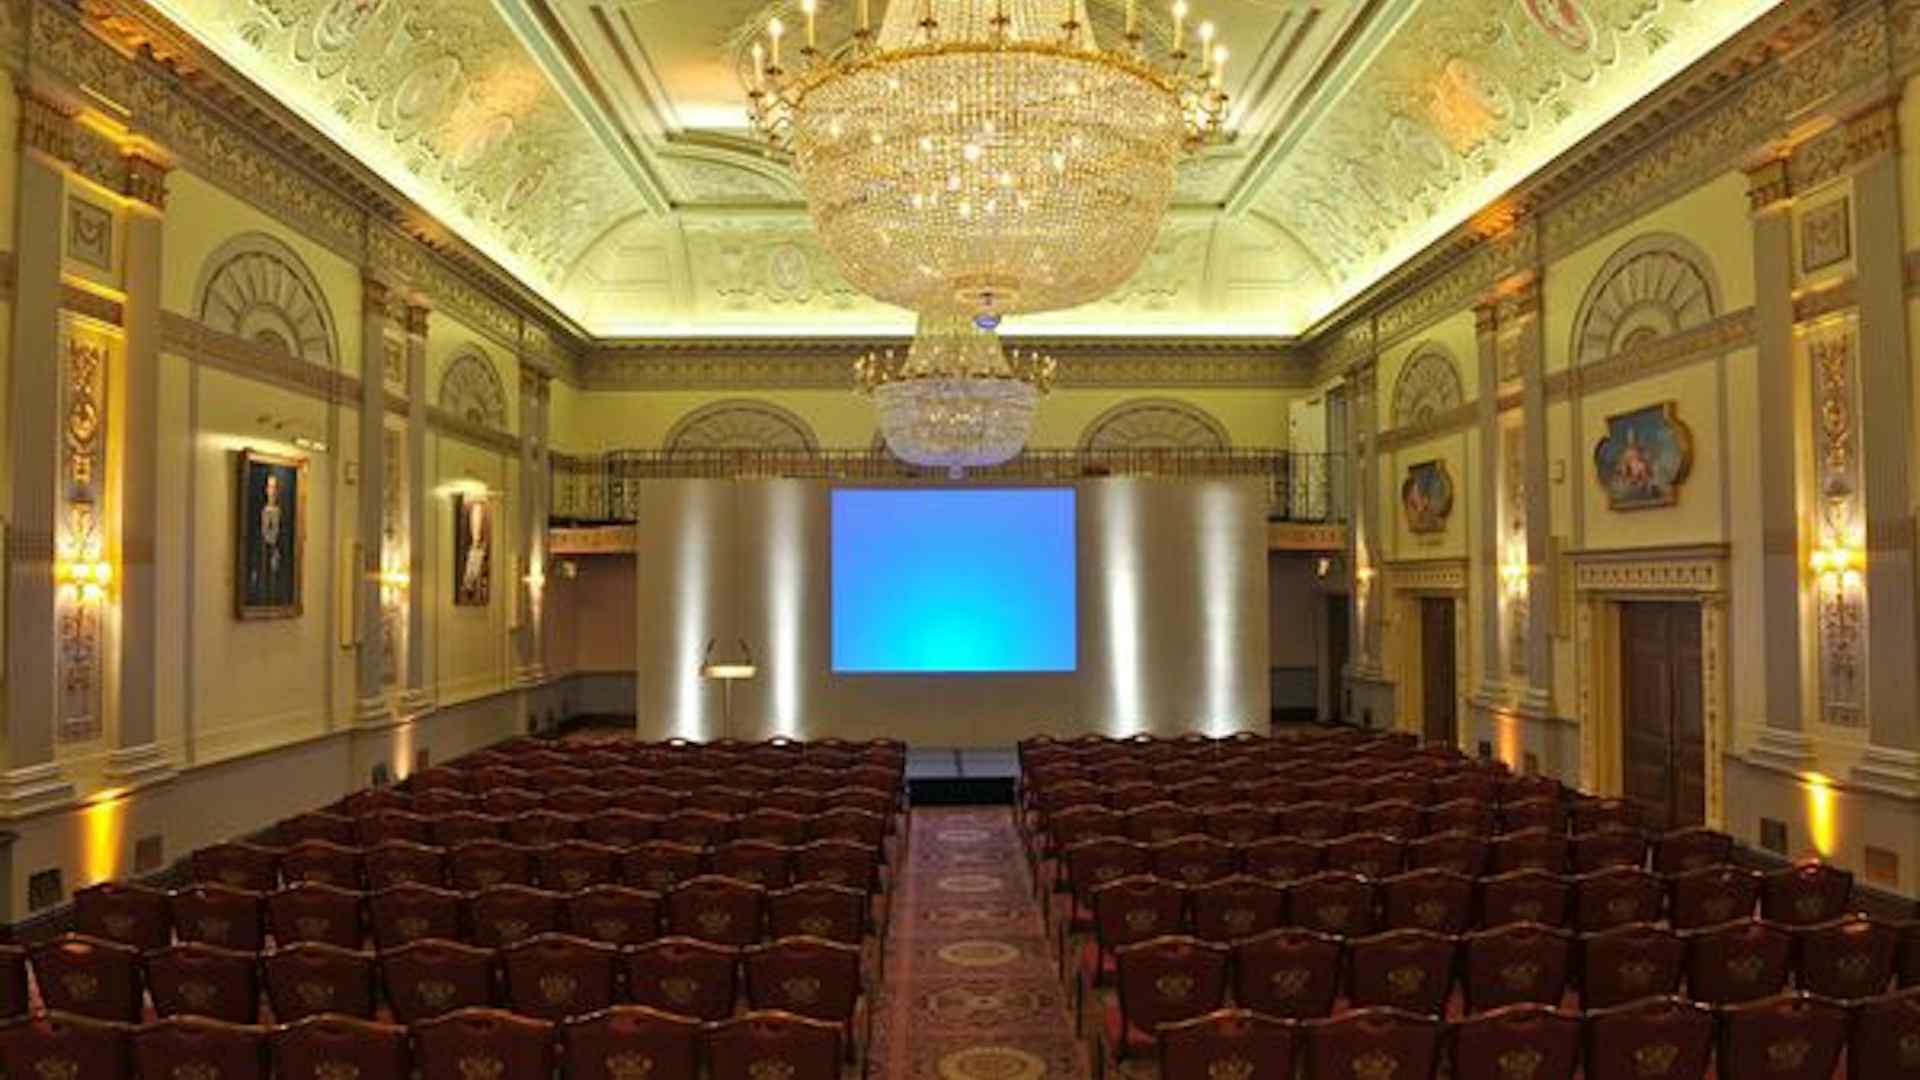 Break The Mould With A Conference At Plaisterers' Hall